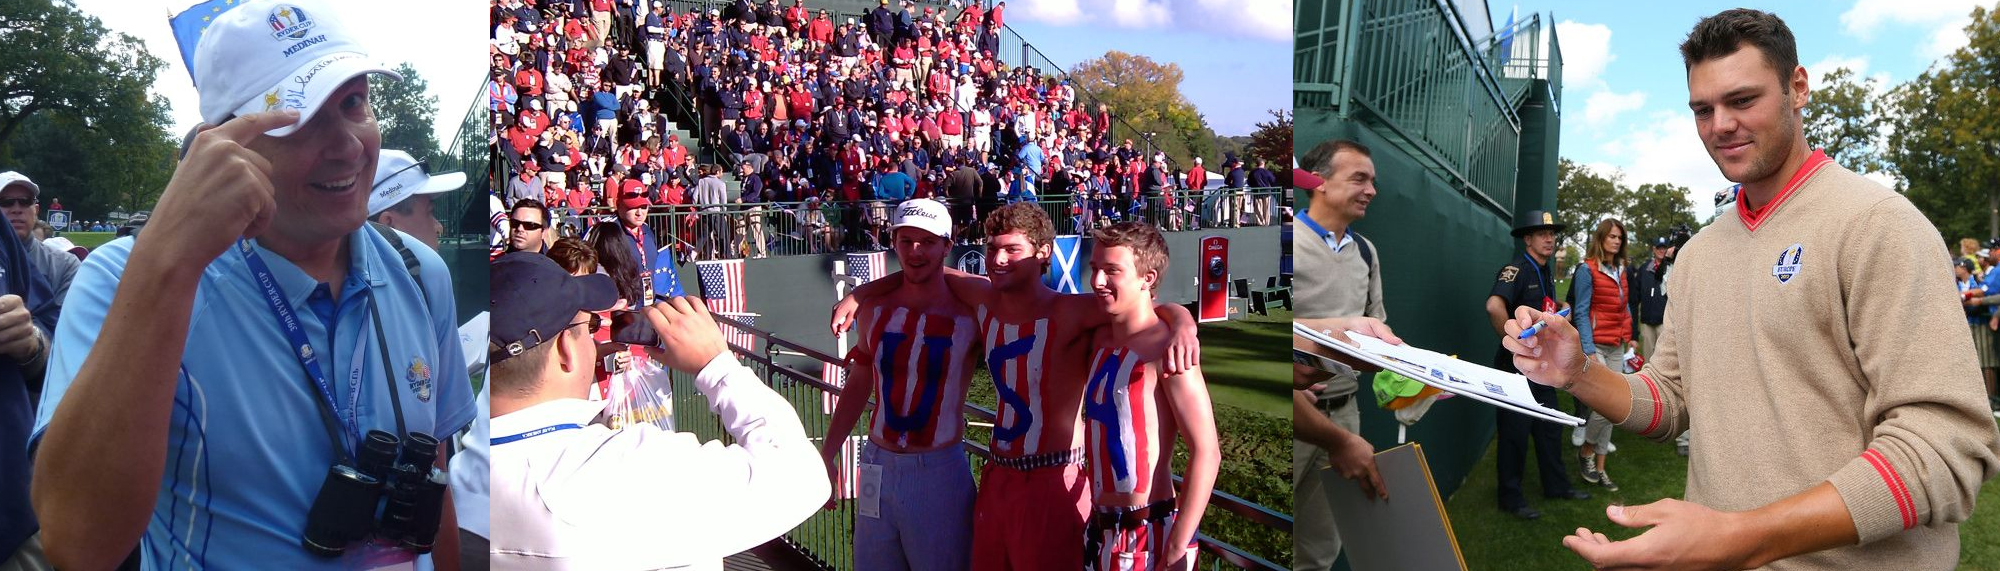 Ryder Cup 2012 - The Miracle of Medinah